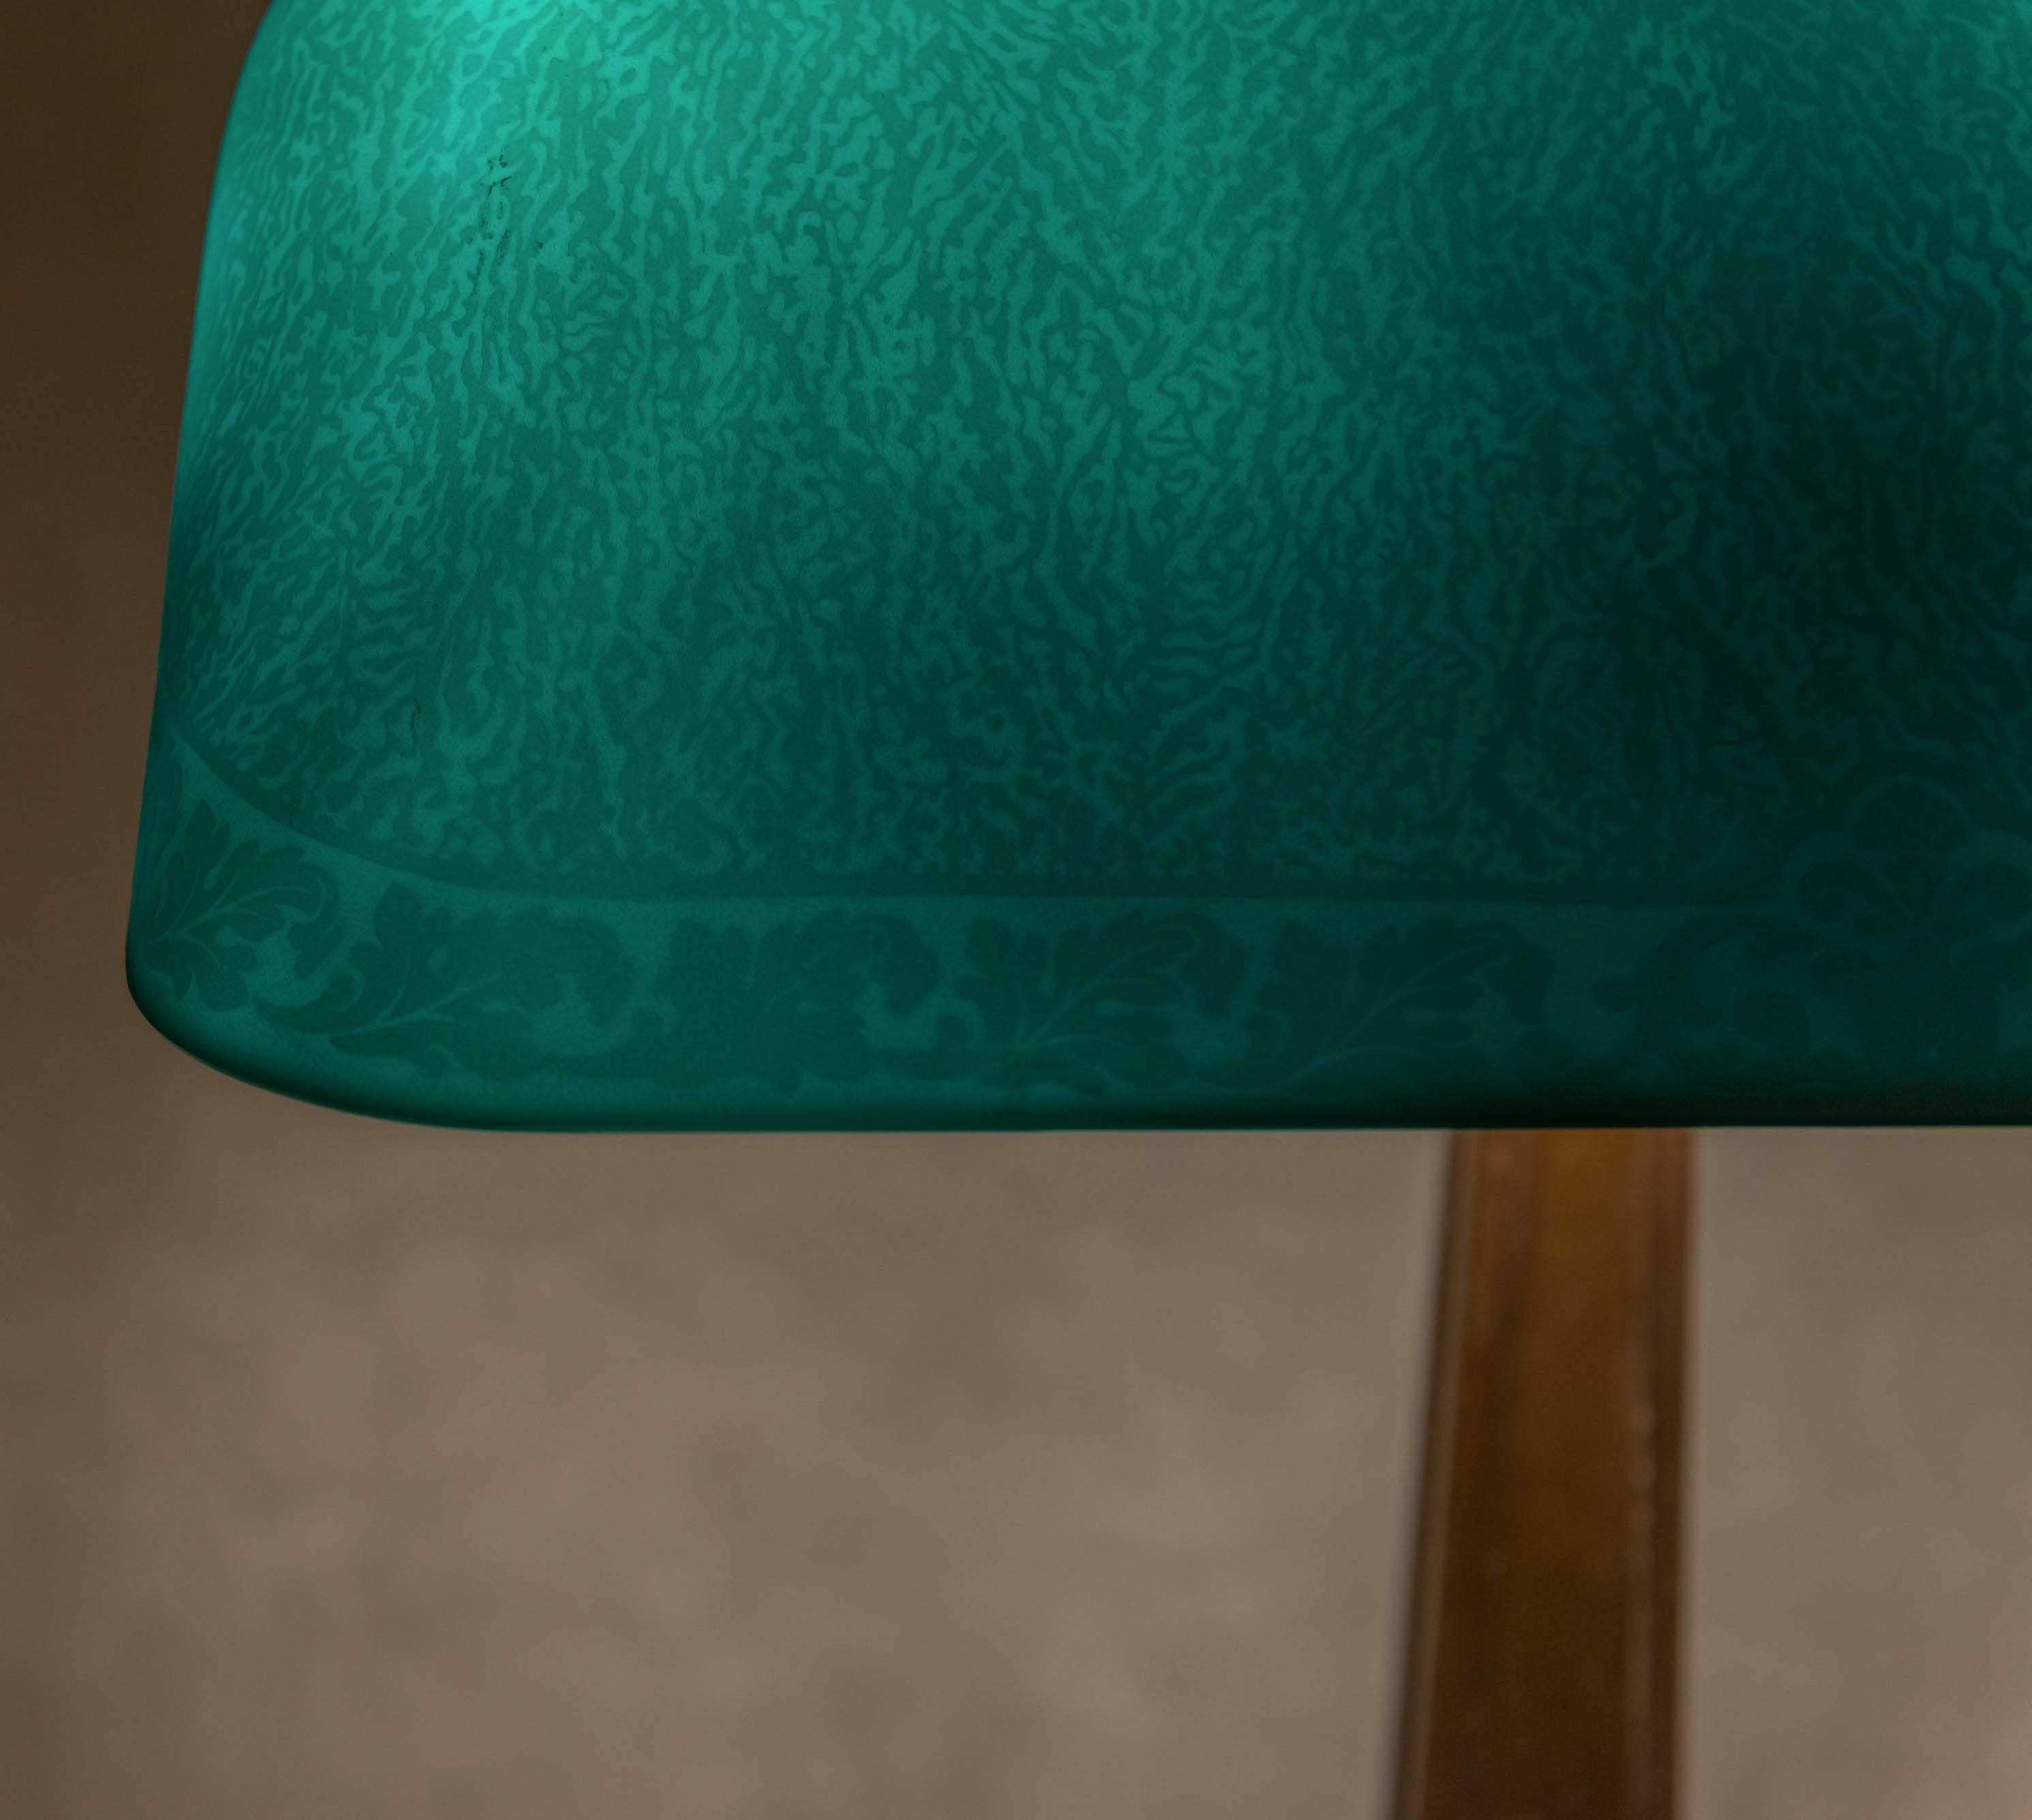 We have been selling these banker's lamp for over 40 years, and we can tell you that we have a very special example here. Emeralite is the premier maker of these banker's lamps, and on a very rare occasion we get one with an etched shade. Bellova